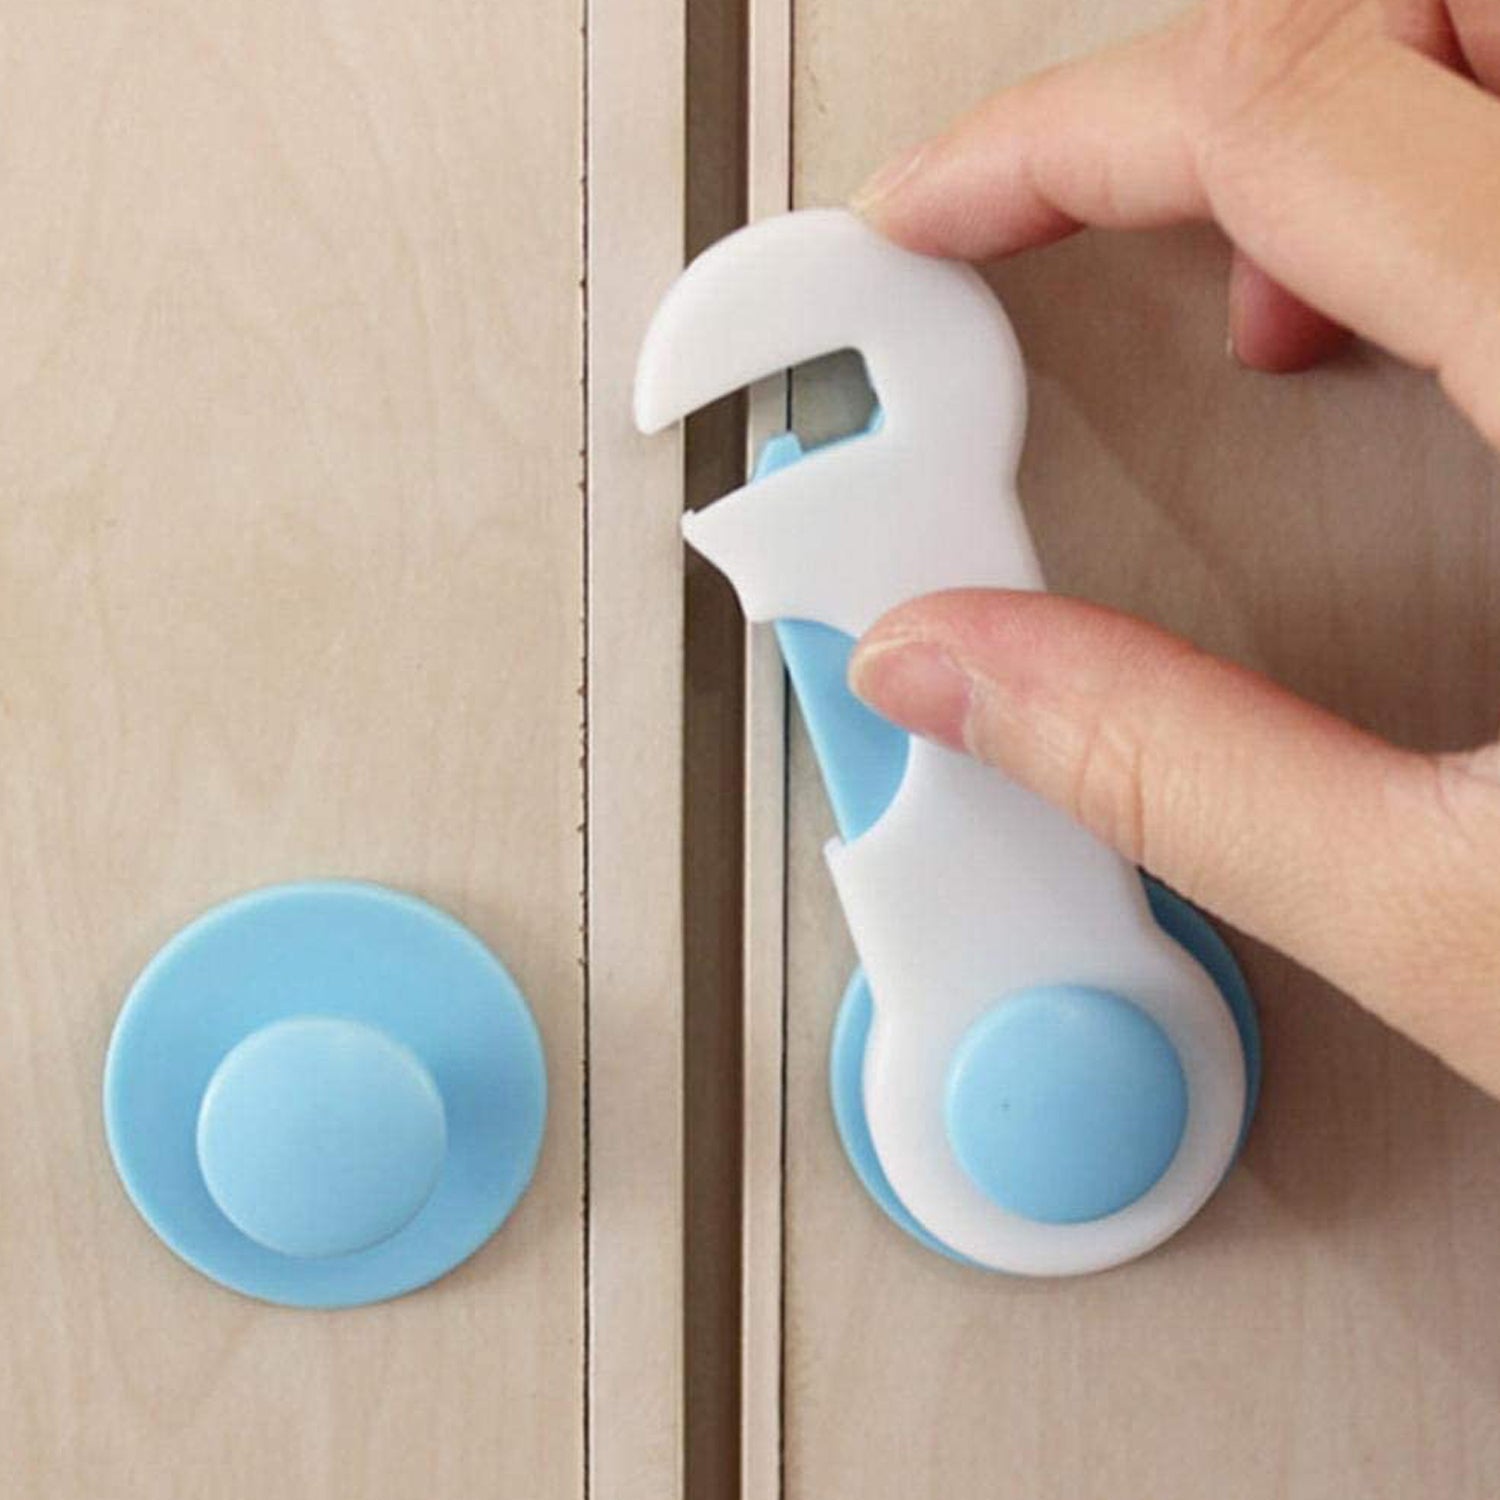 4688A Child Safety lock Child Toddler Baby Safety Locks Proofing for Cabinet Toilet Seat Fridge Door Drawers ( 1 pc) DeoDap